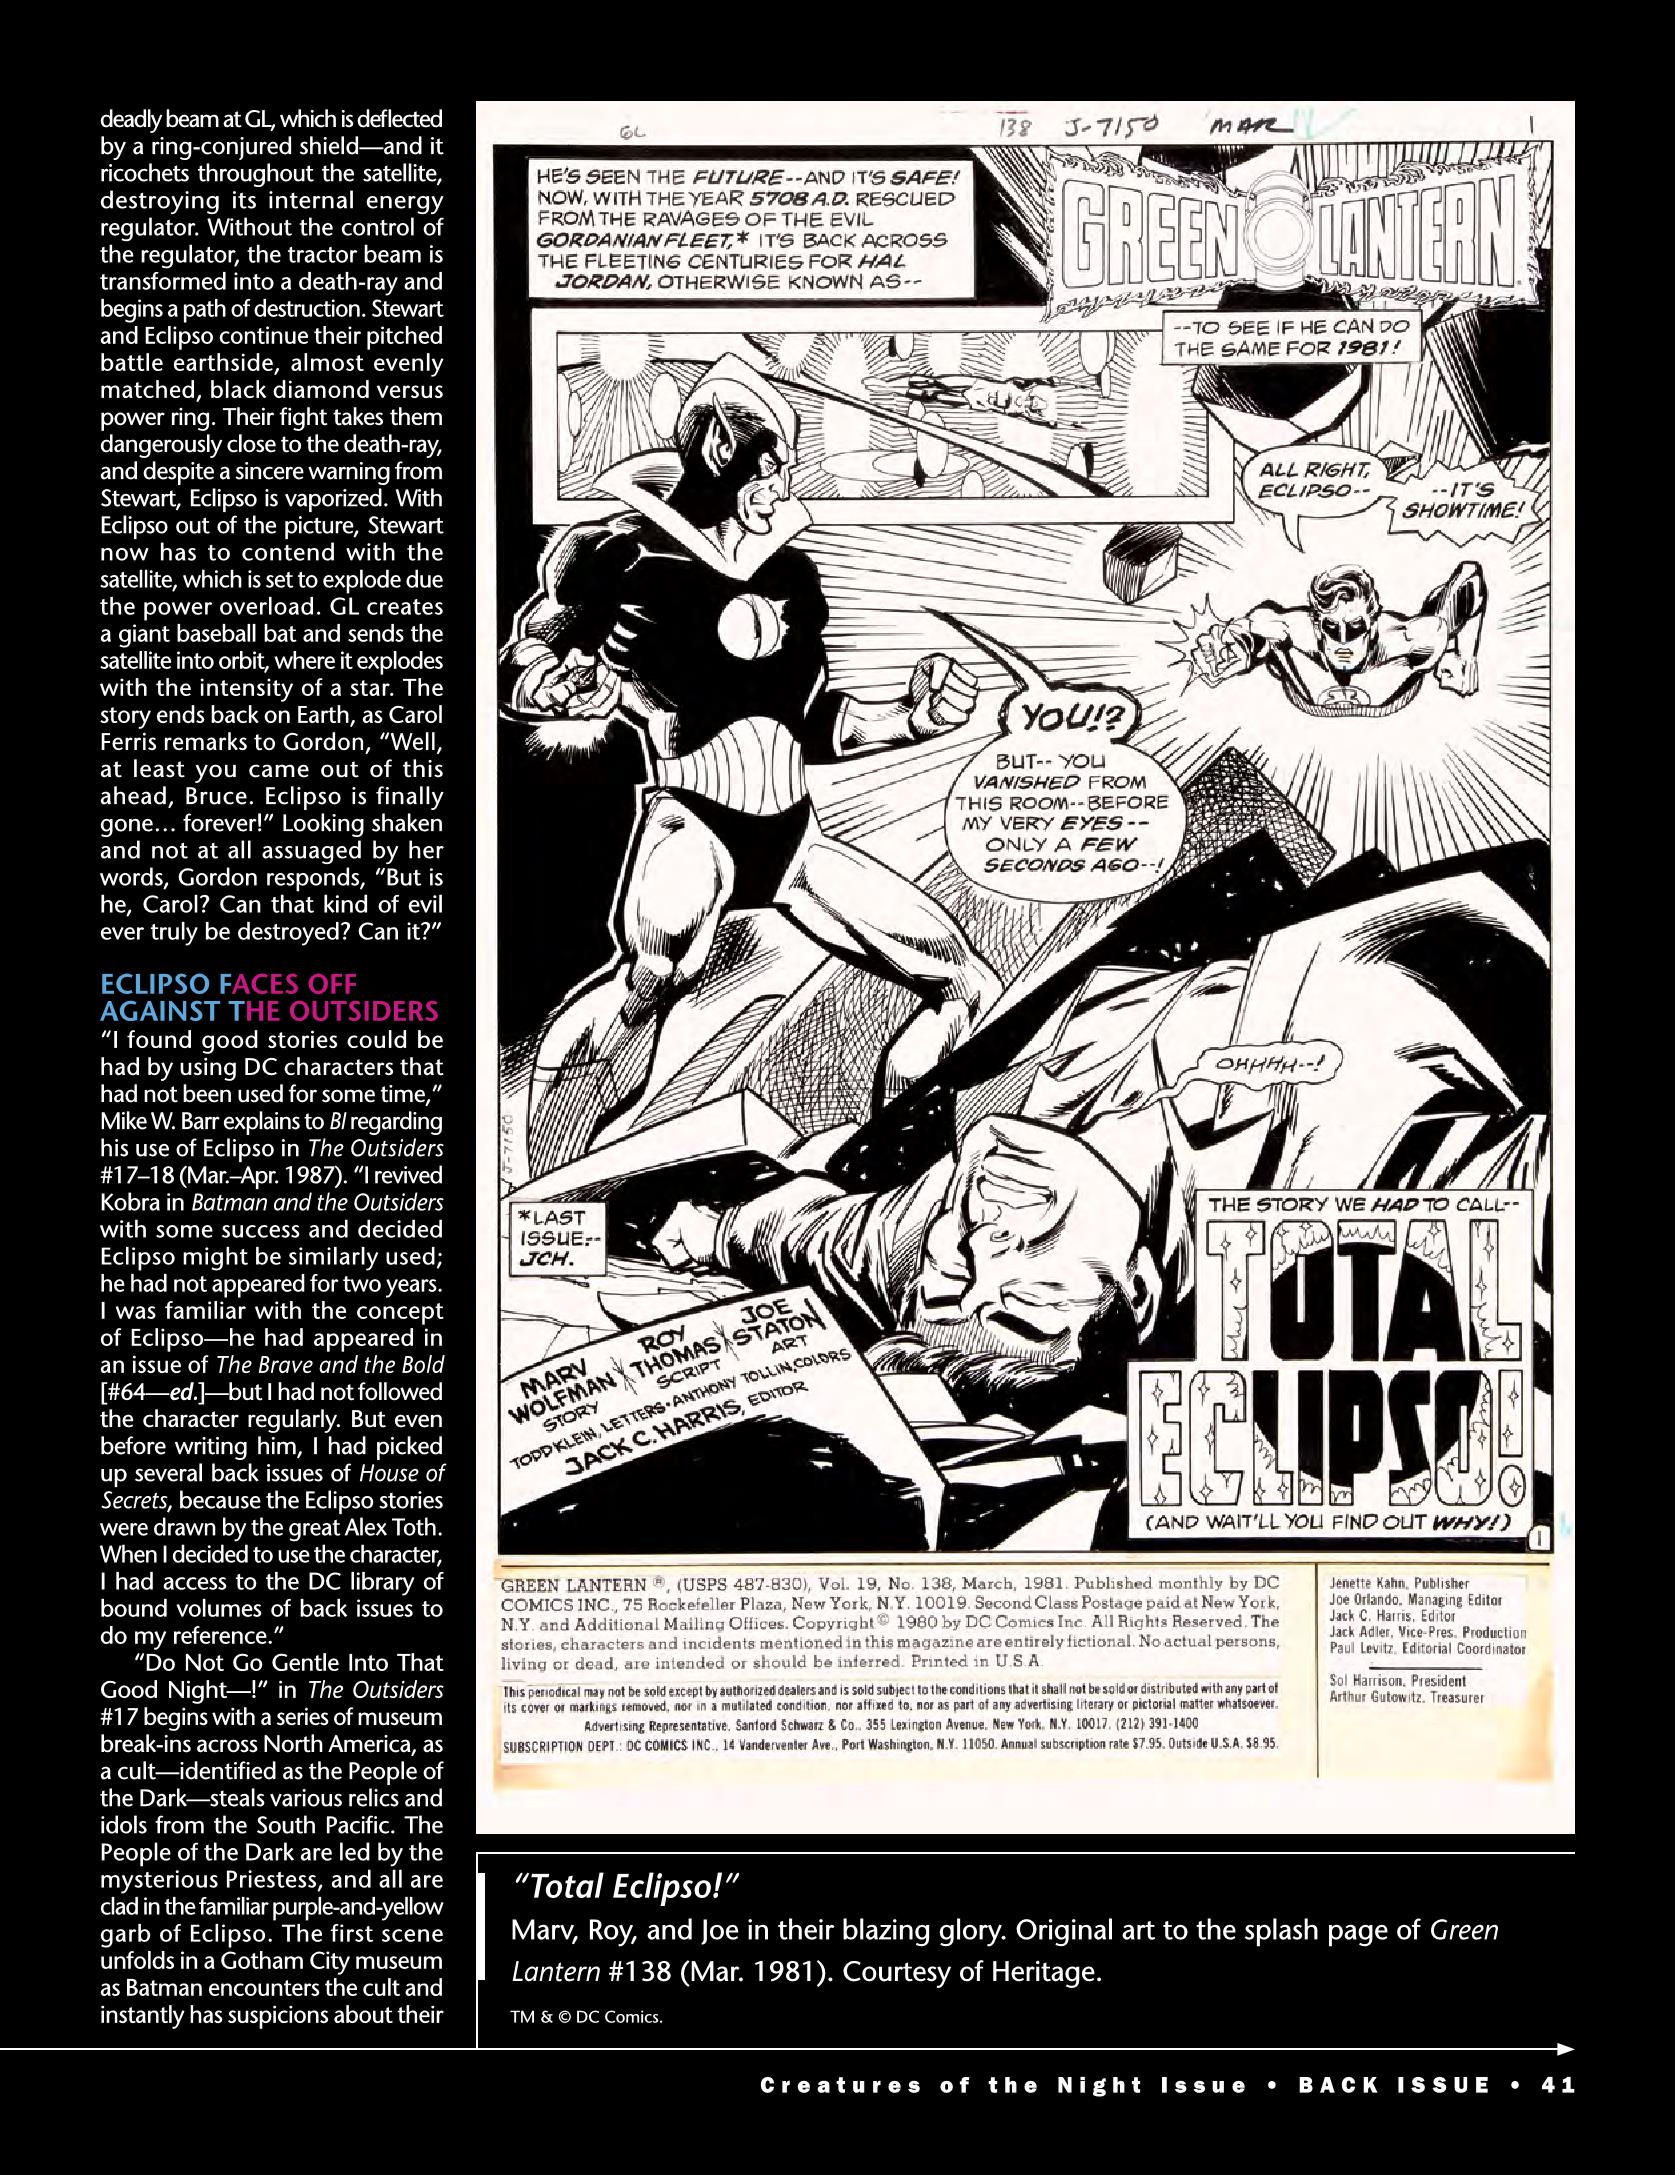 Read online Back Issue comic -  Issue #95 - 38